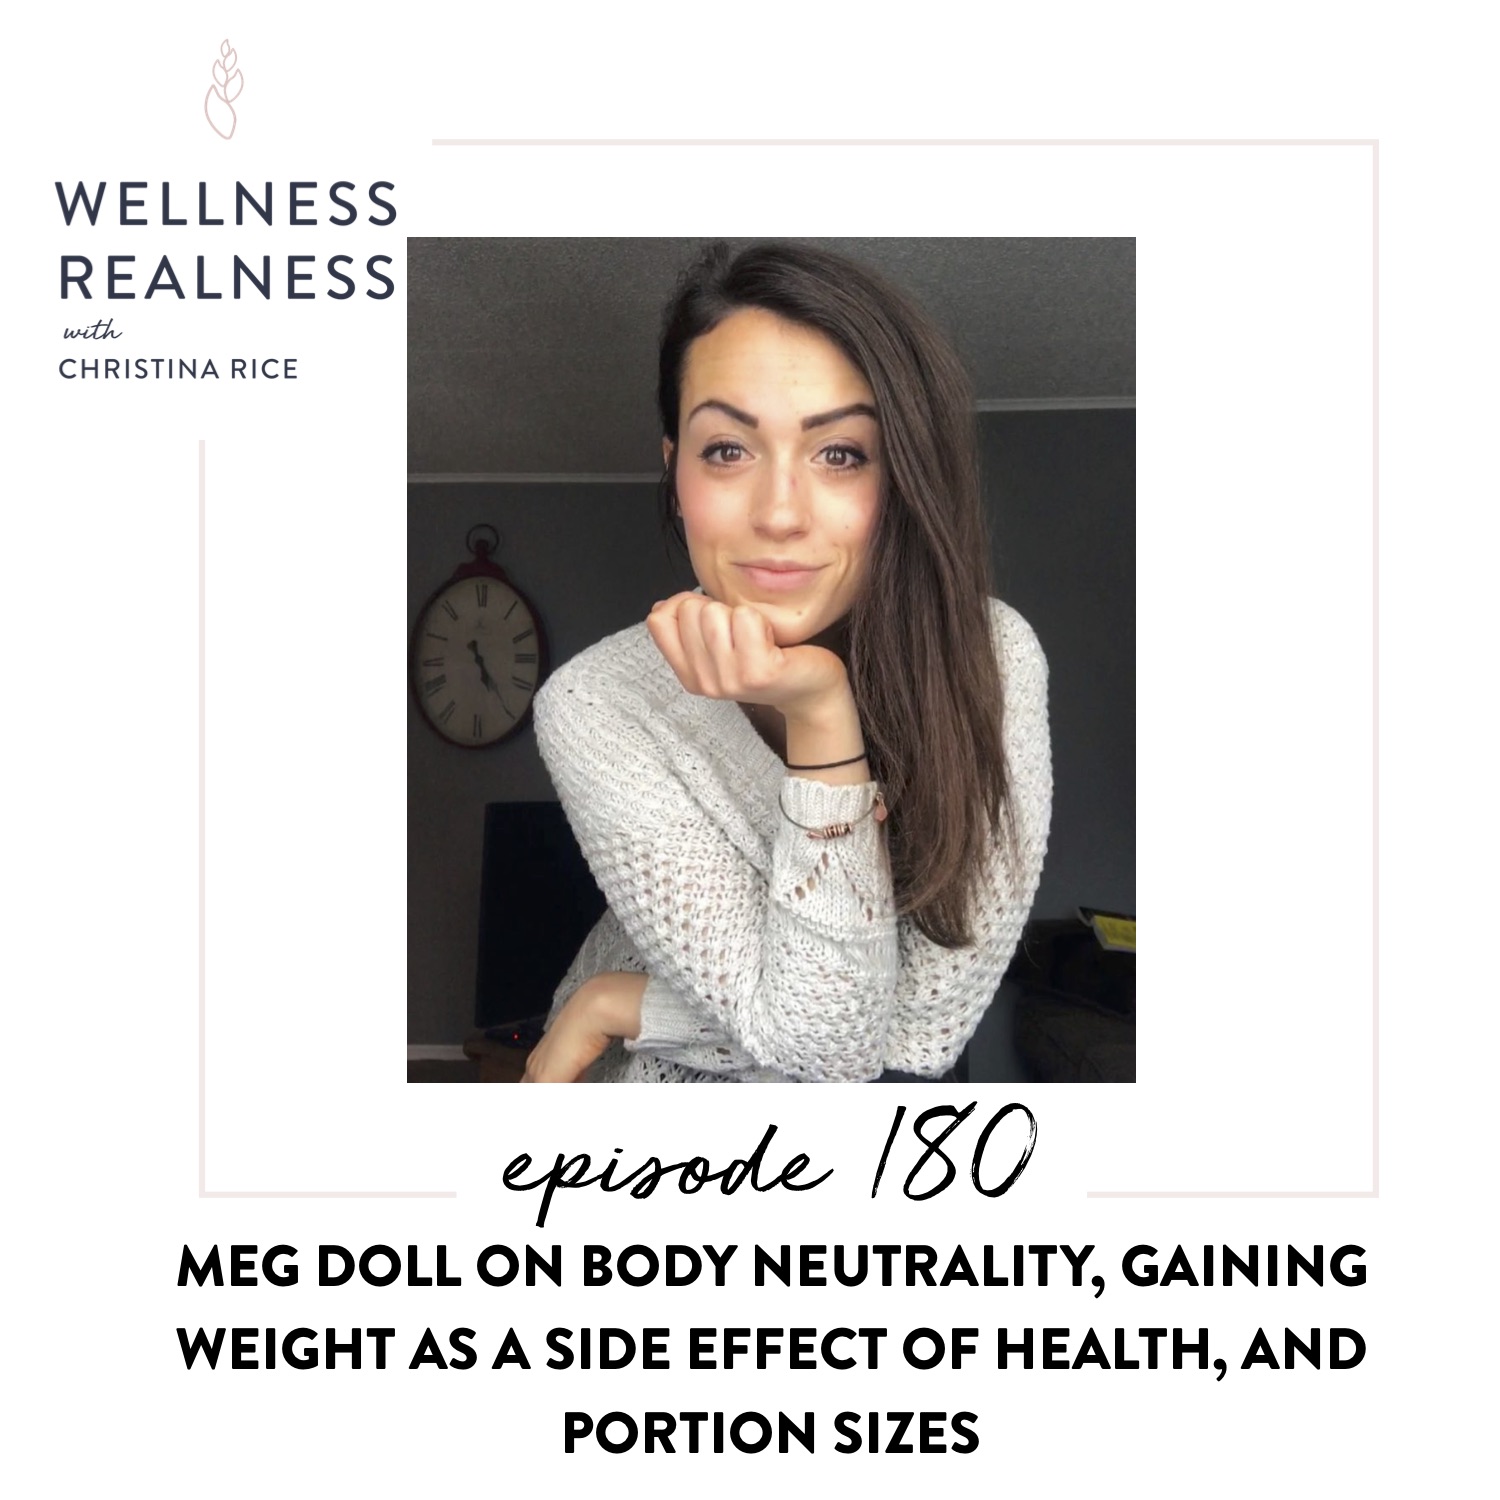 180: Meg Doll on Body Neutrality, Gaining Weight as a Side Effect of Health, and Portion Sizes